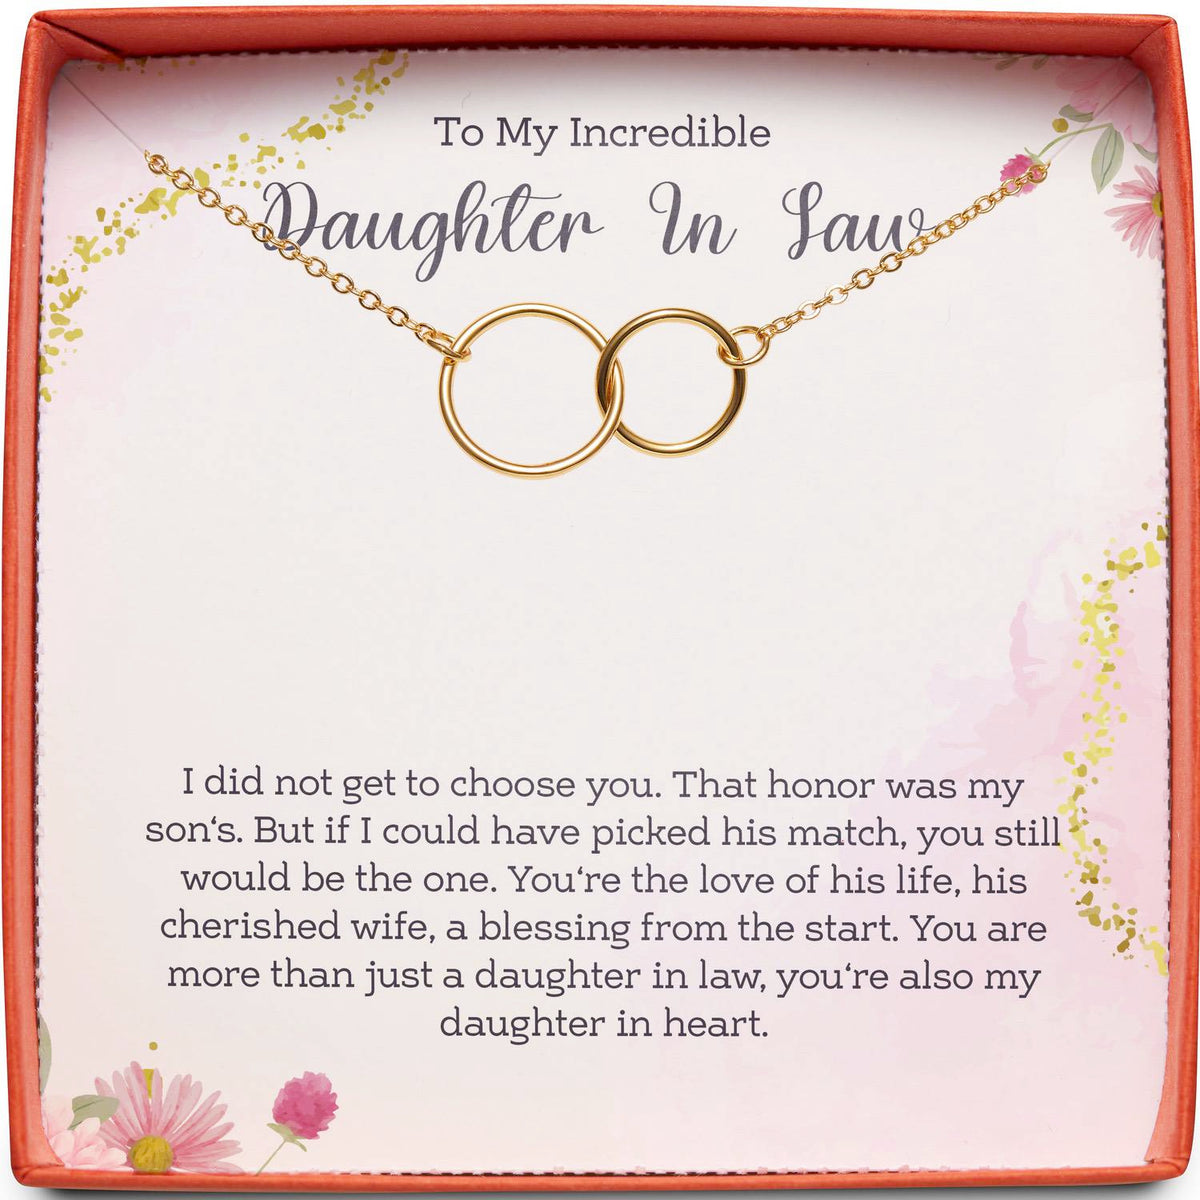 To My Incredible Daughter in Law | My Daughter in Heart | Interlocking Circles